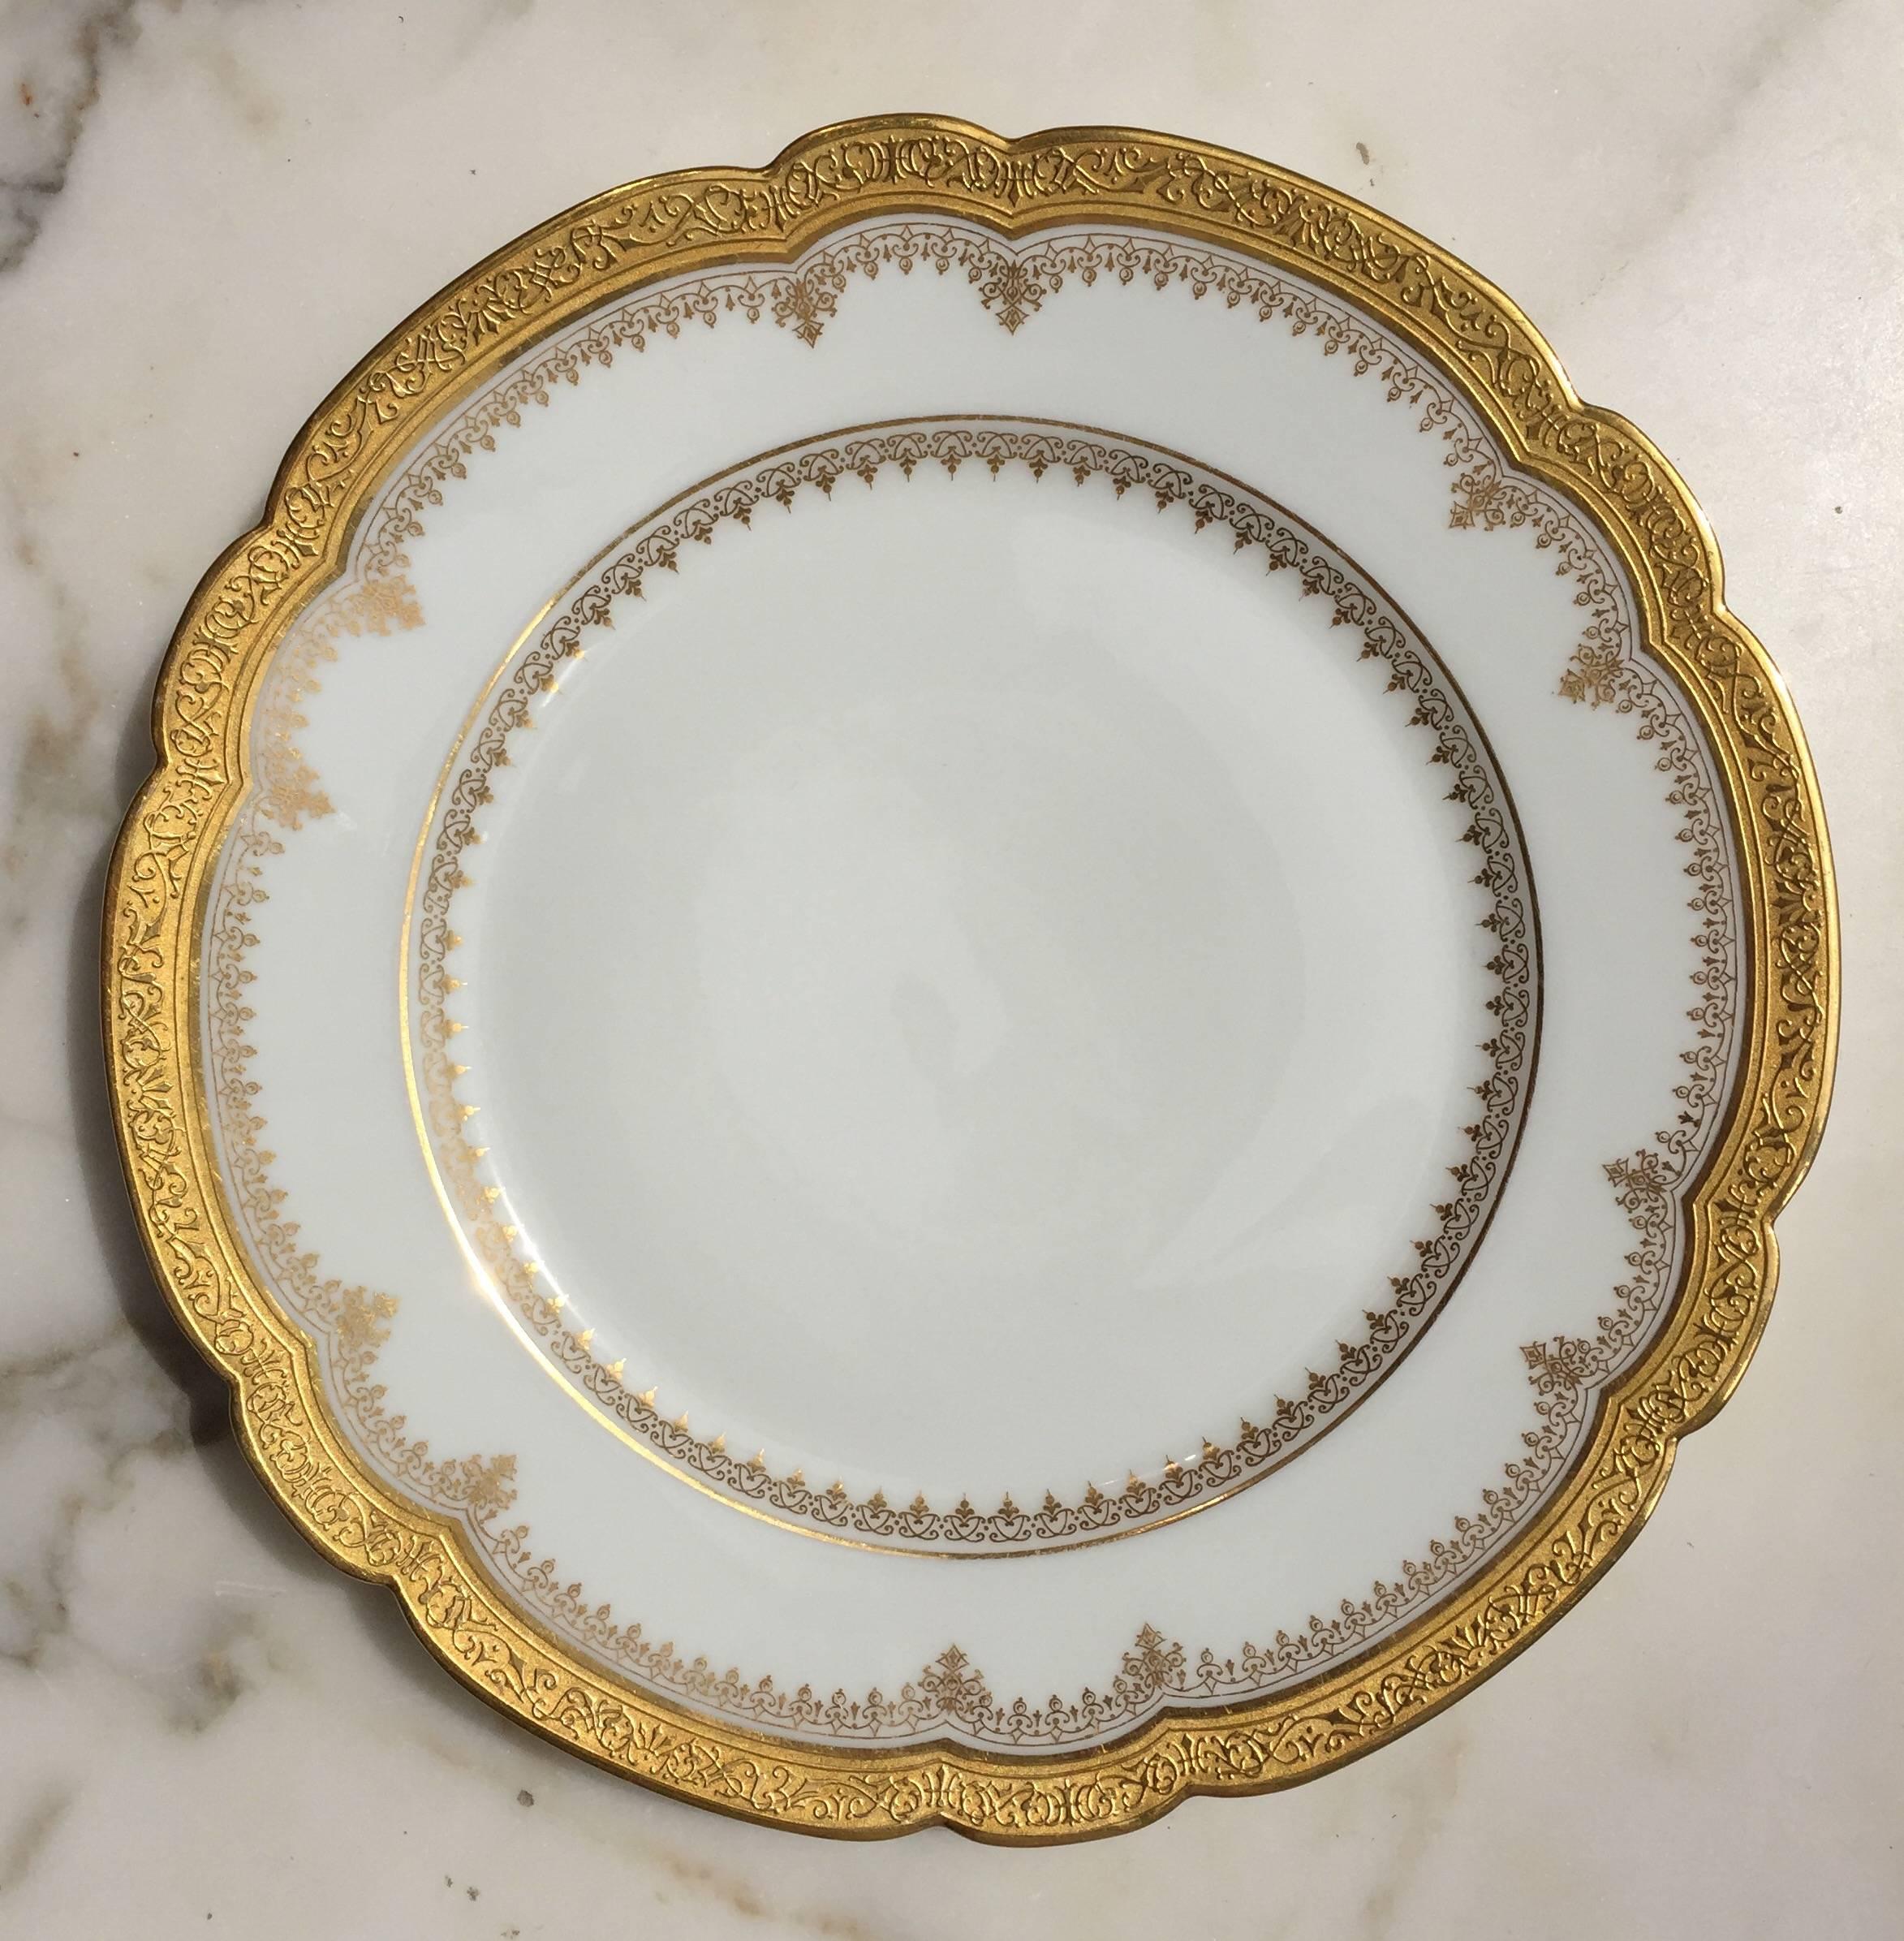 This pristine set of 12 Bone China Luncheon Plates have a scalloped edge encrusted in 24-karat gold relief, as well as two more delicate gilt patterns, see image #4.
The backside is signed in cursive script in gold 